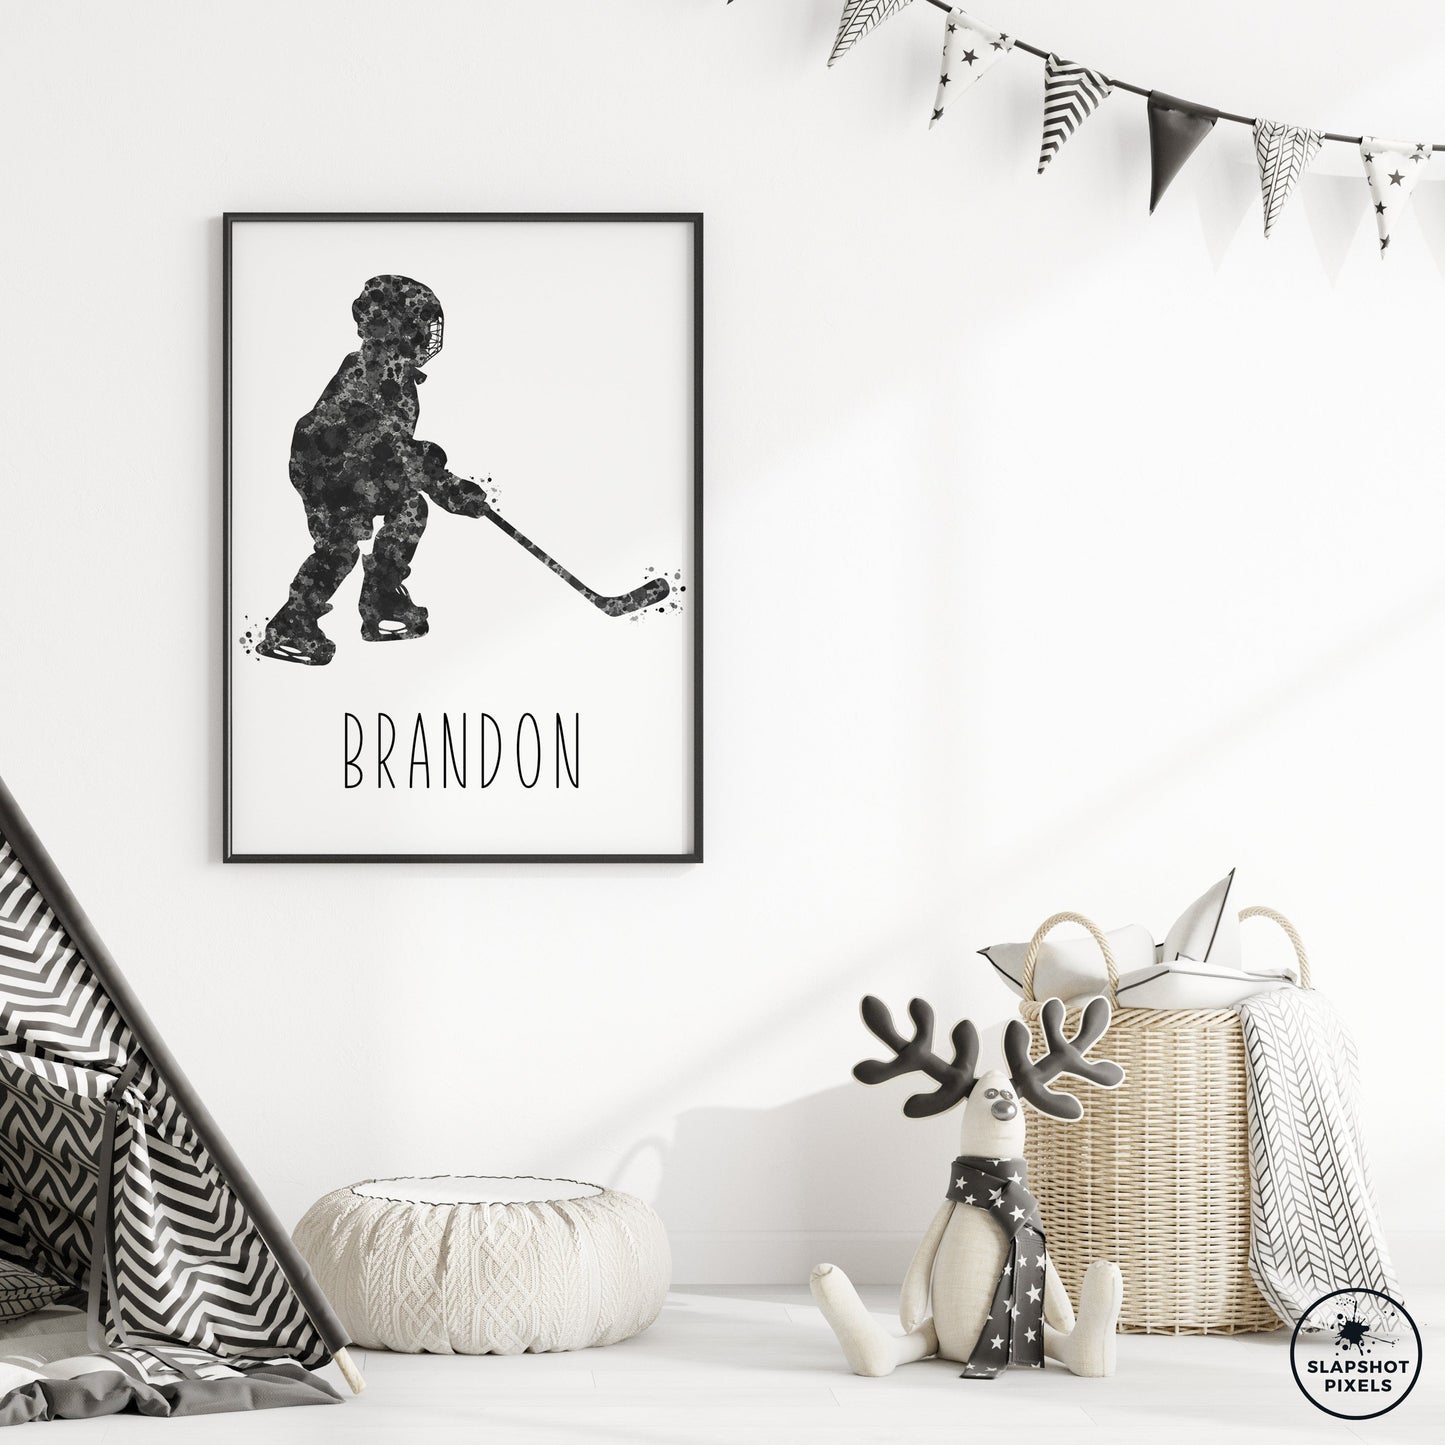 Personalized hockey poster of a child hockey player holding a hockey stick with custom name under the player. Designed in black and grey watercolor splatters. Perfect hockey gifts for boys, hockey team gifts, hockey coach gift, hockey wall art décor in a hockey bedroom and birthday gifts for hockey players.